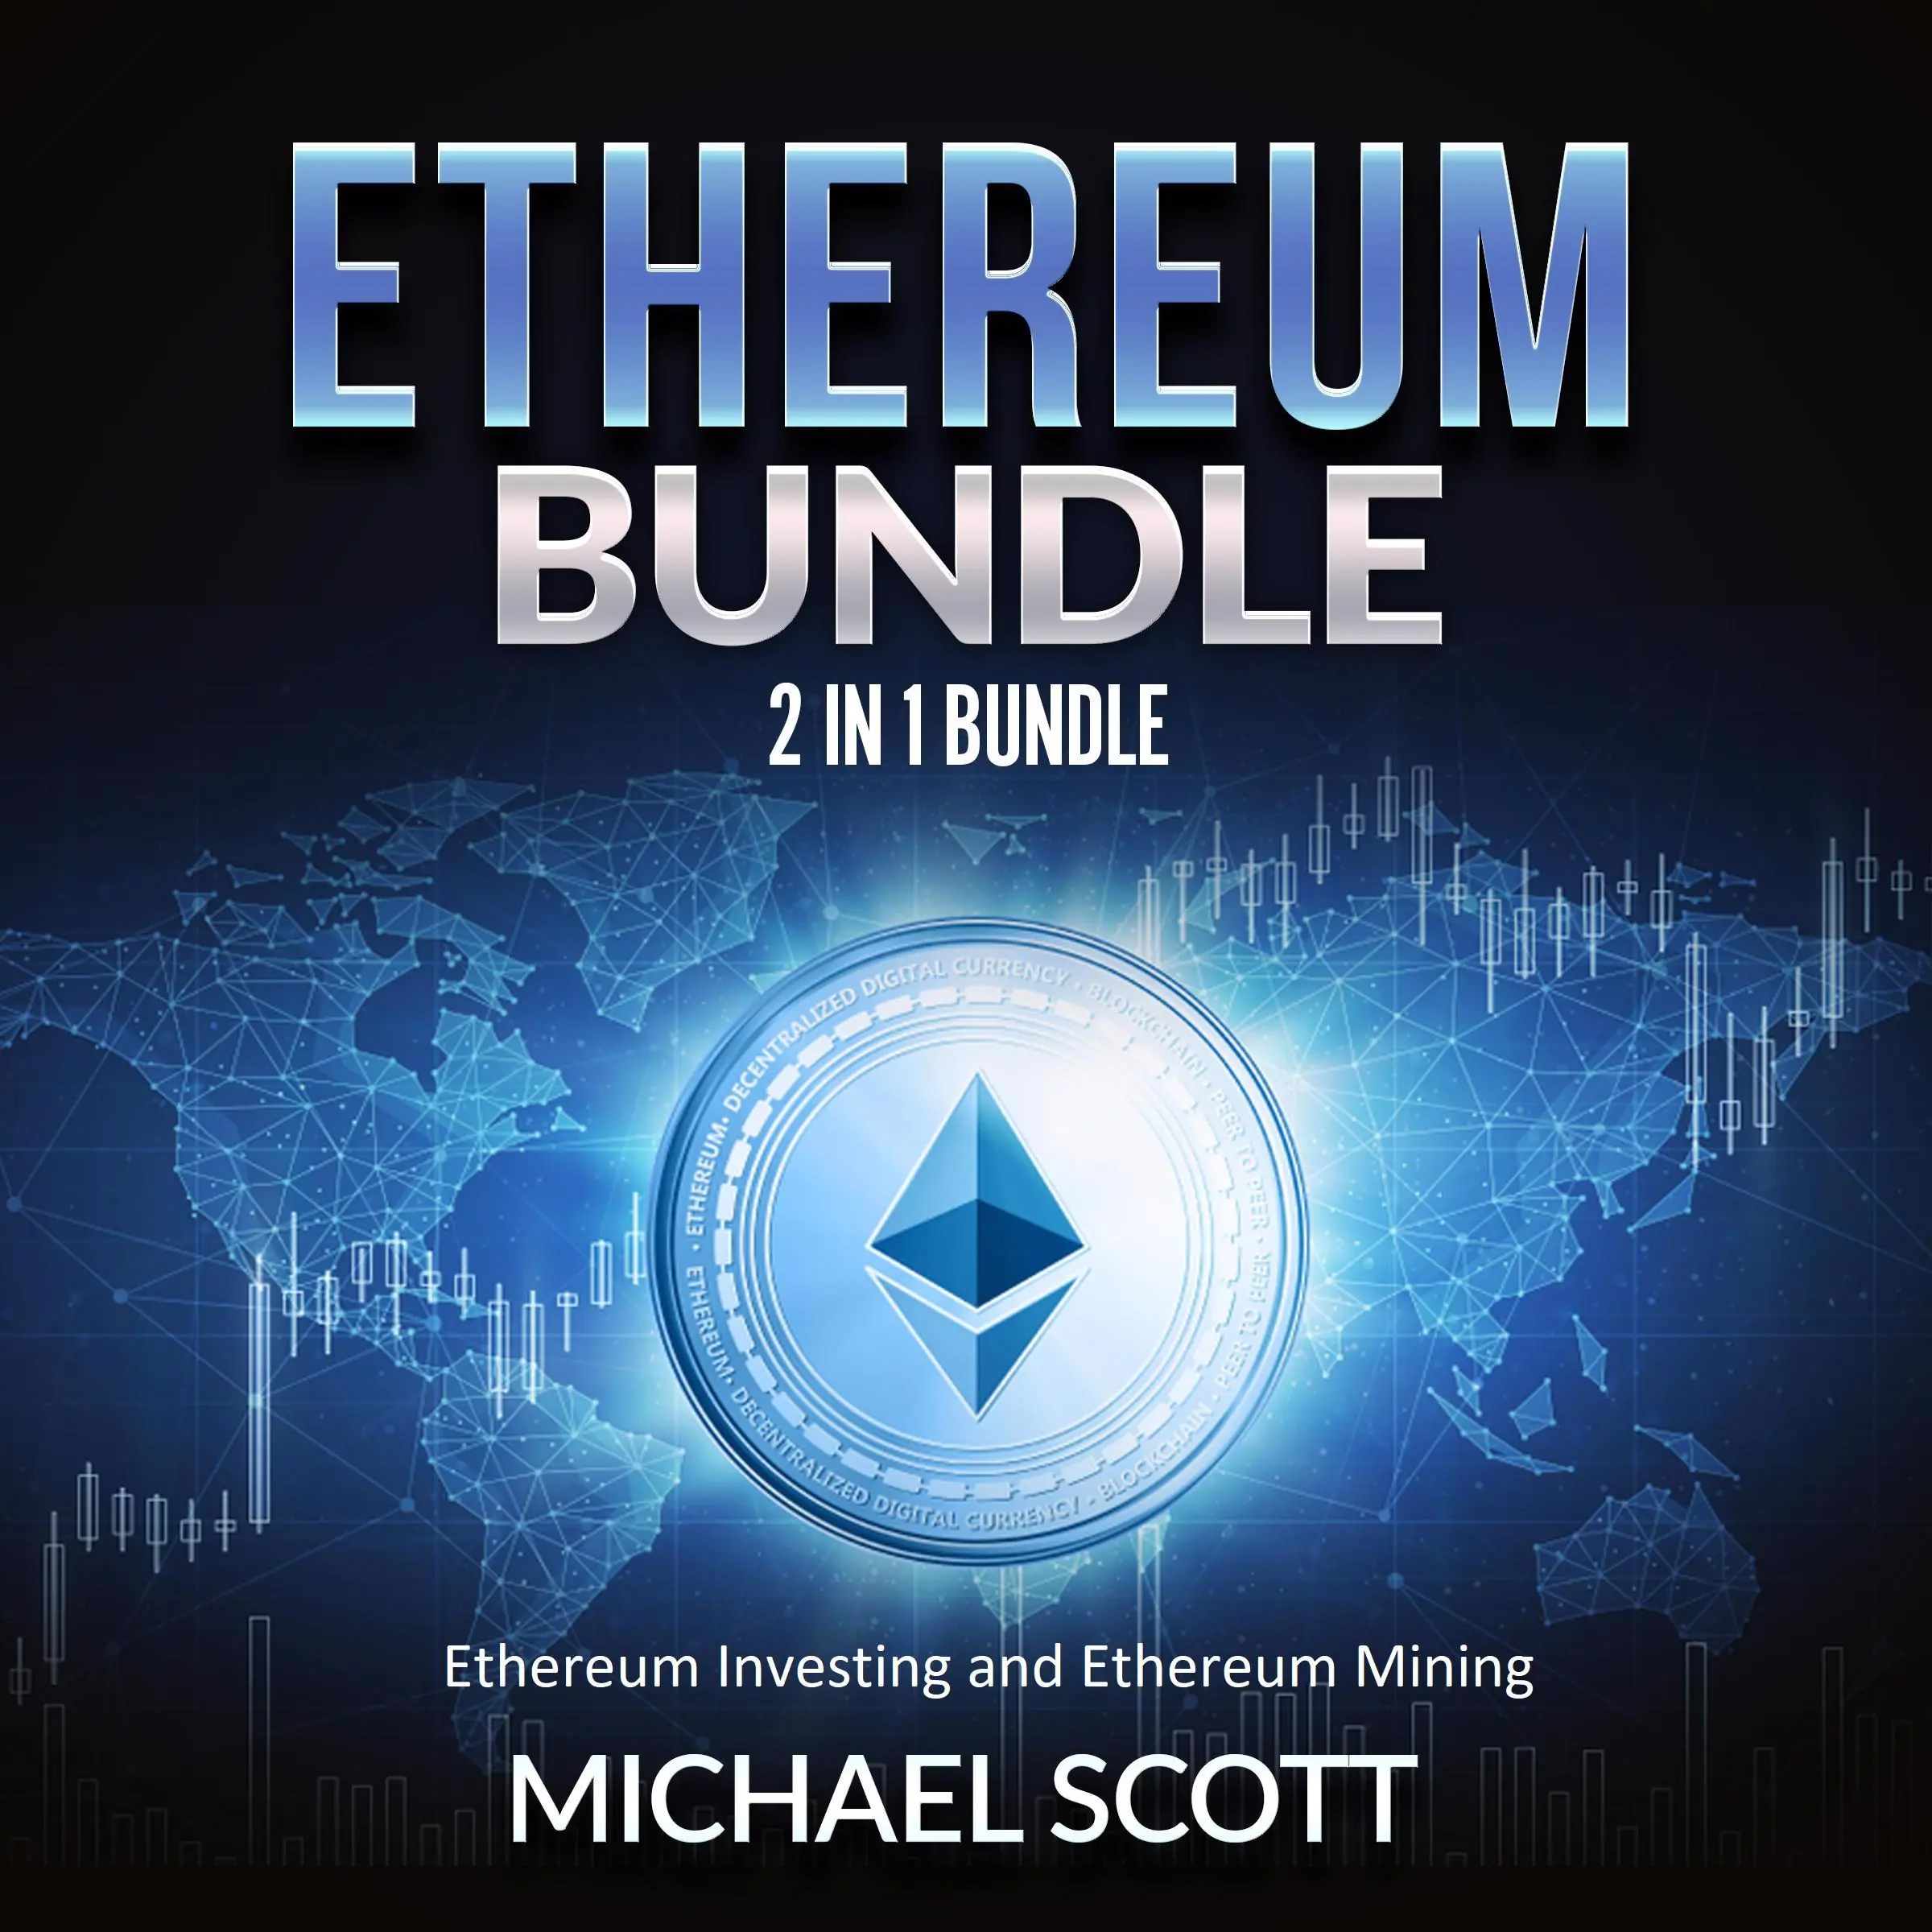 Ethereum Bundle: 2 in 1 Bundle, Ethereum Investing and Ethereum Mining by Michael Scott Audiobook